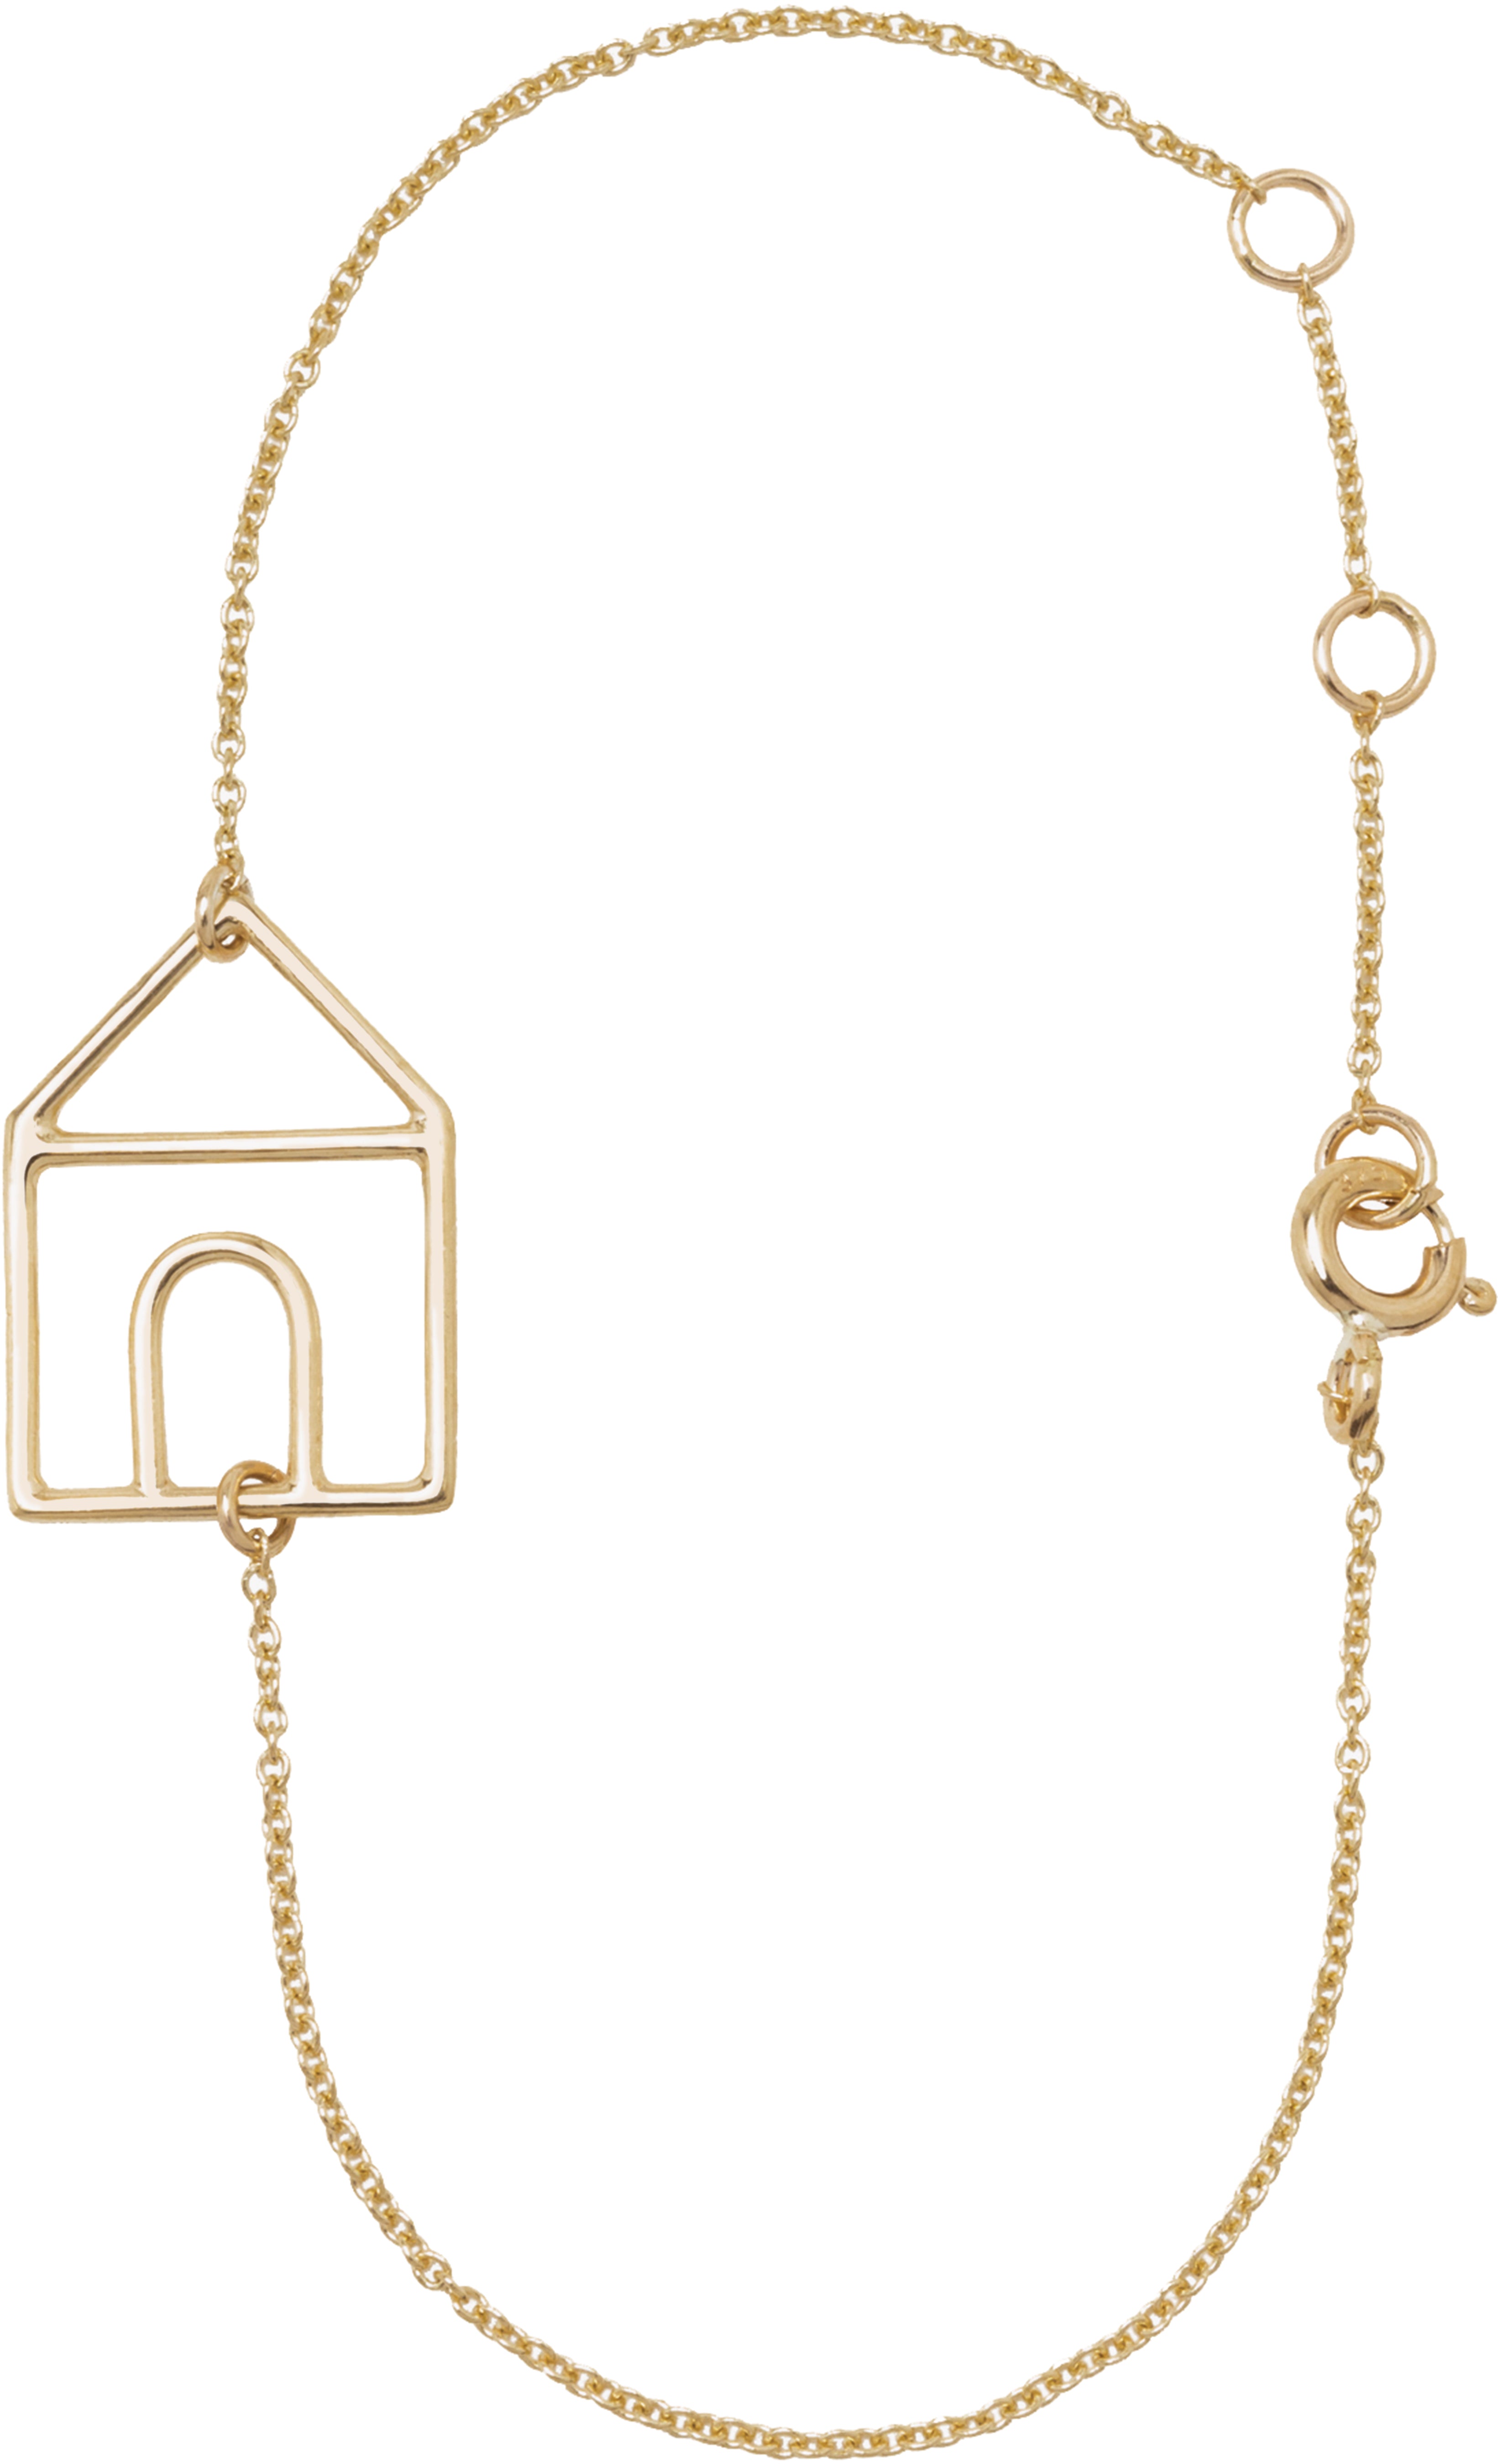 Gold chain bracelet with house shaped pendant